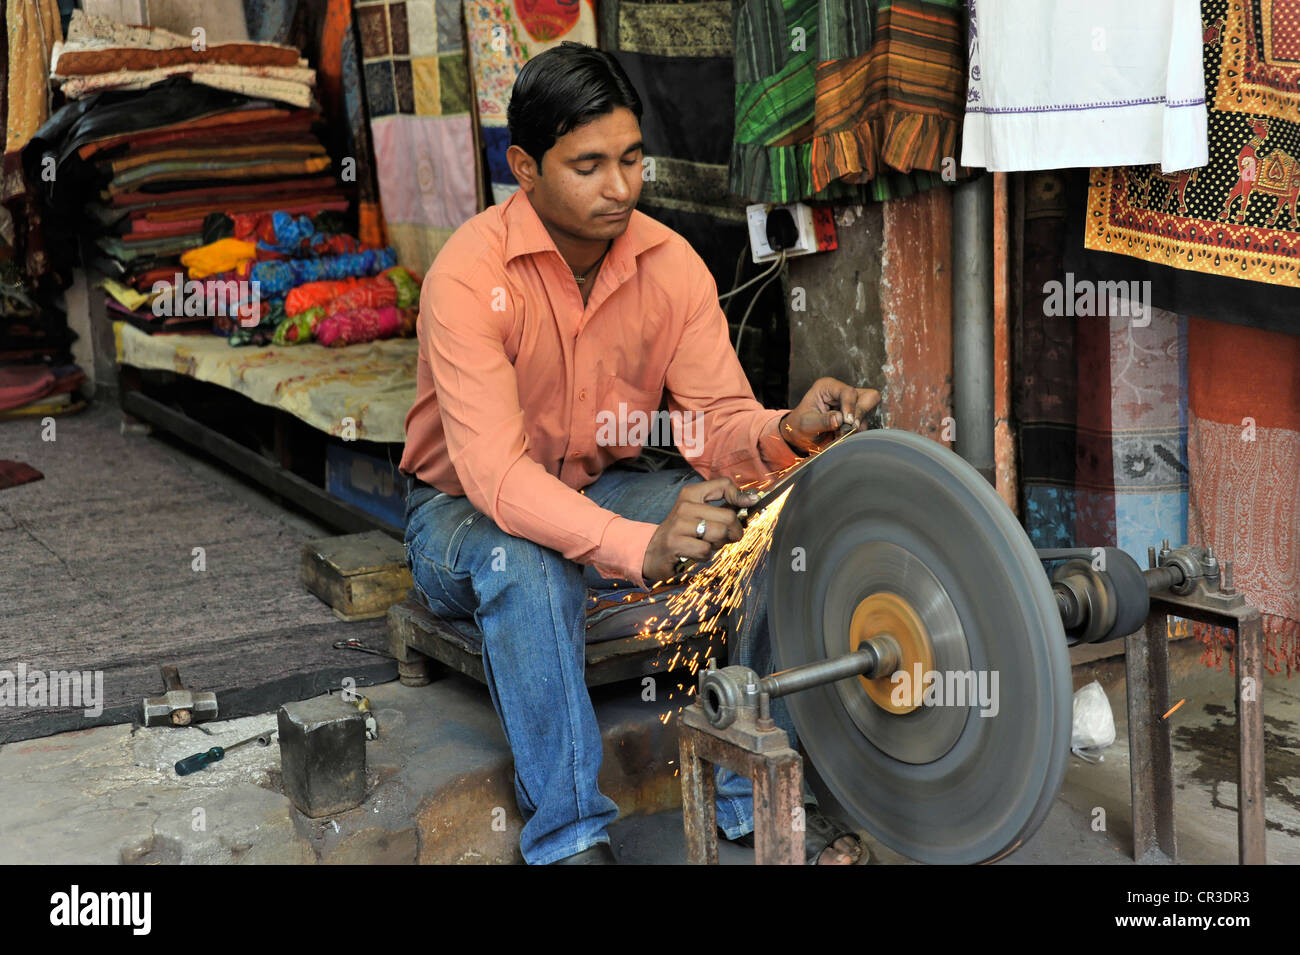 Manufacture of swords and daggers, knife grinder in Jaipur, Rajasthan, India, Asia Stock Photo